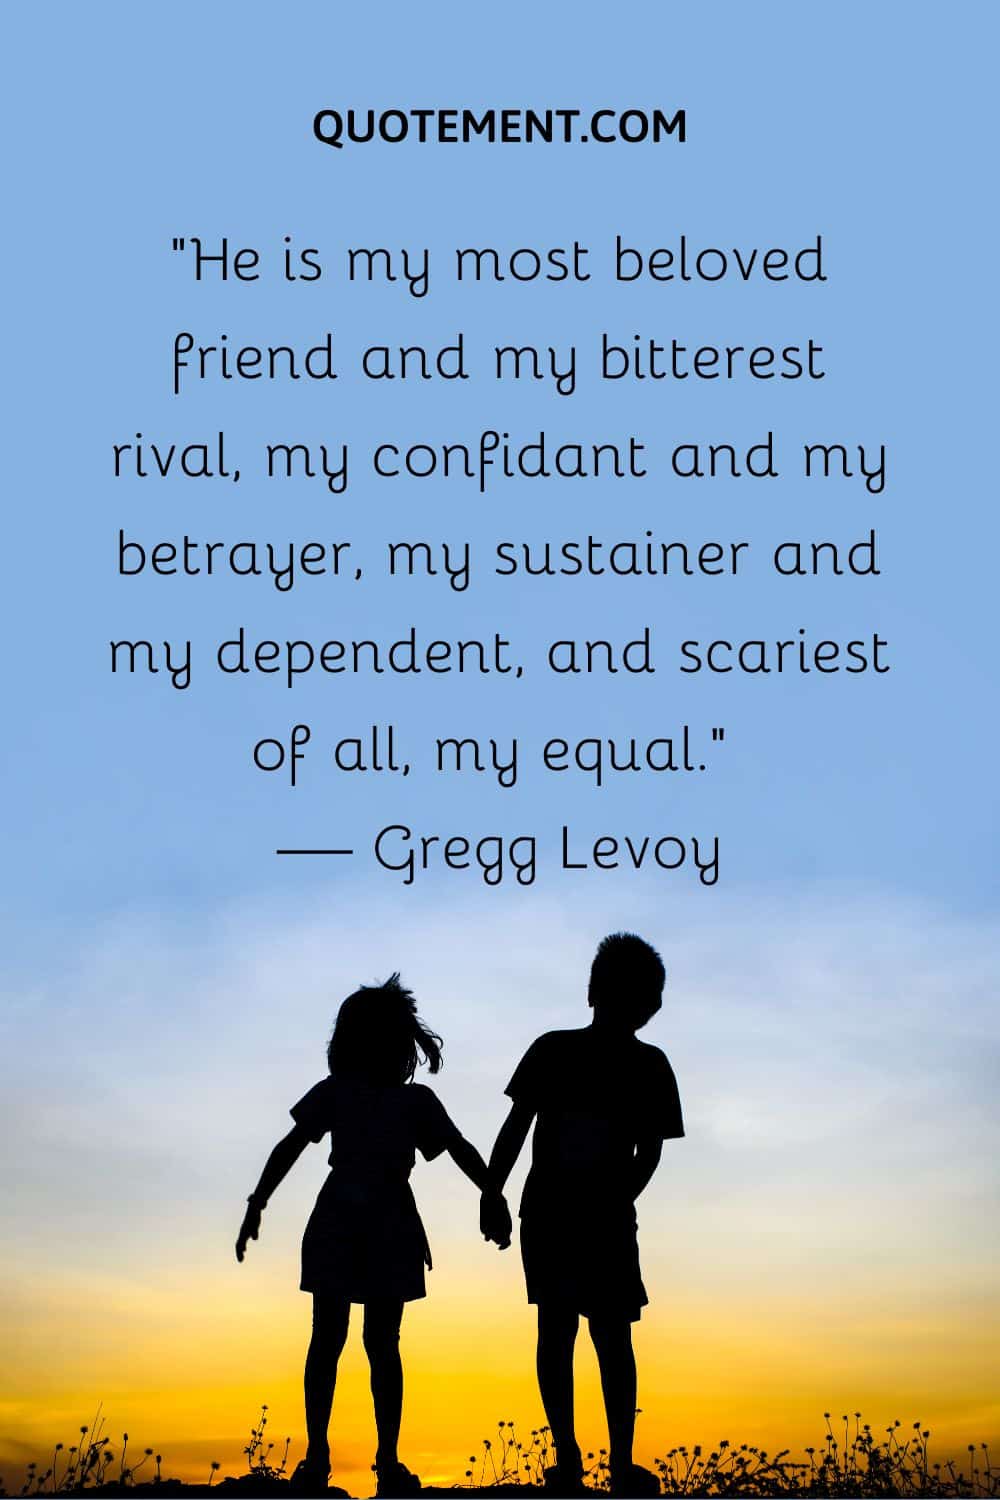 “He is my most beloved friend and my bitterest rival, my confidant and my betrayer, my sustainer and my dependent, and scariest of all, my equal.” — Gregg Levoy